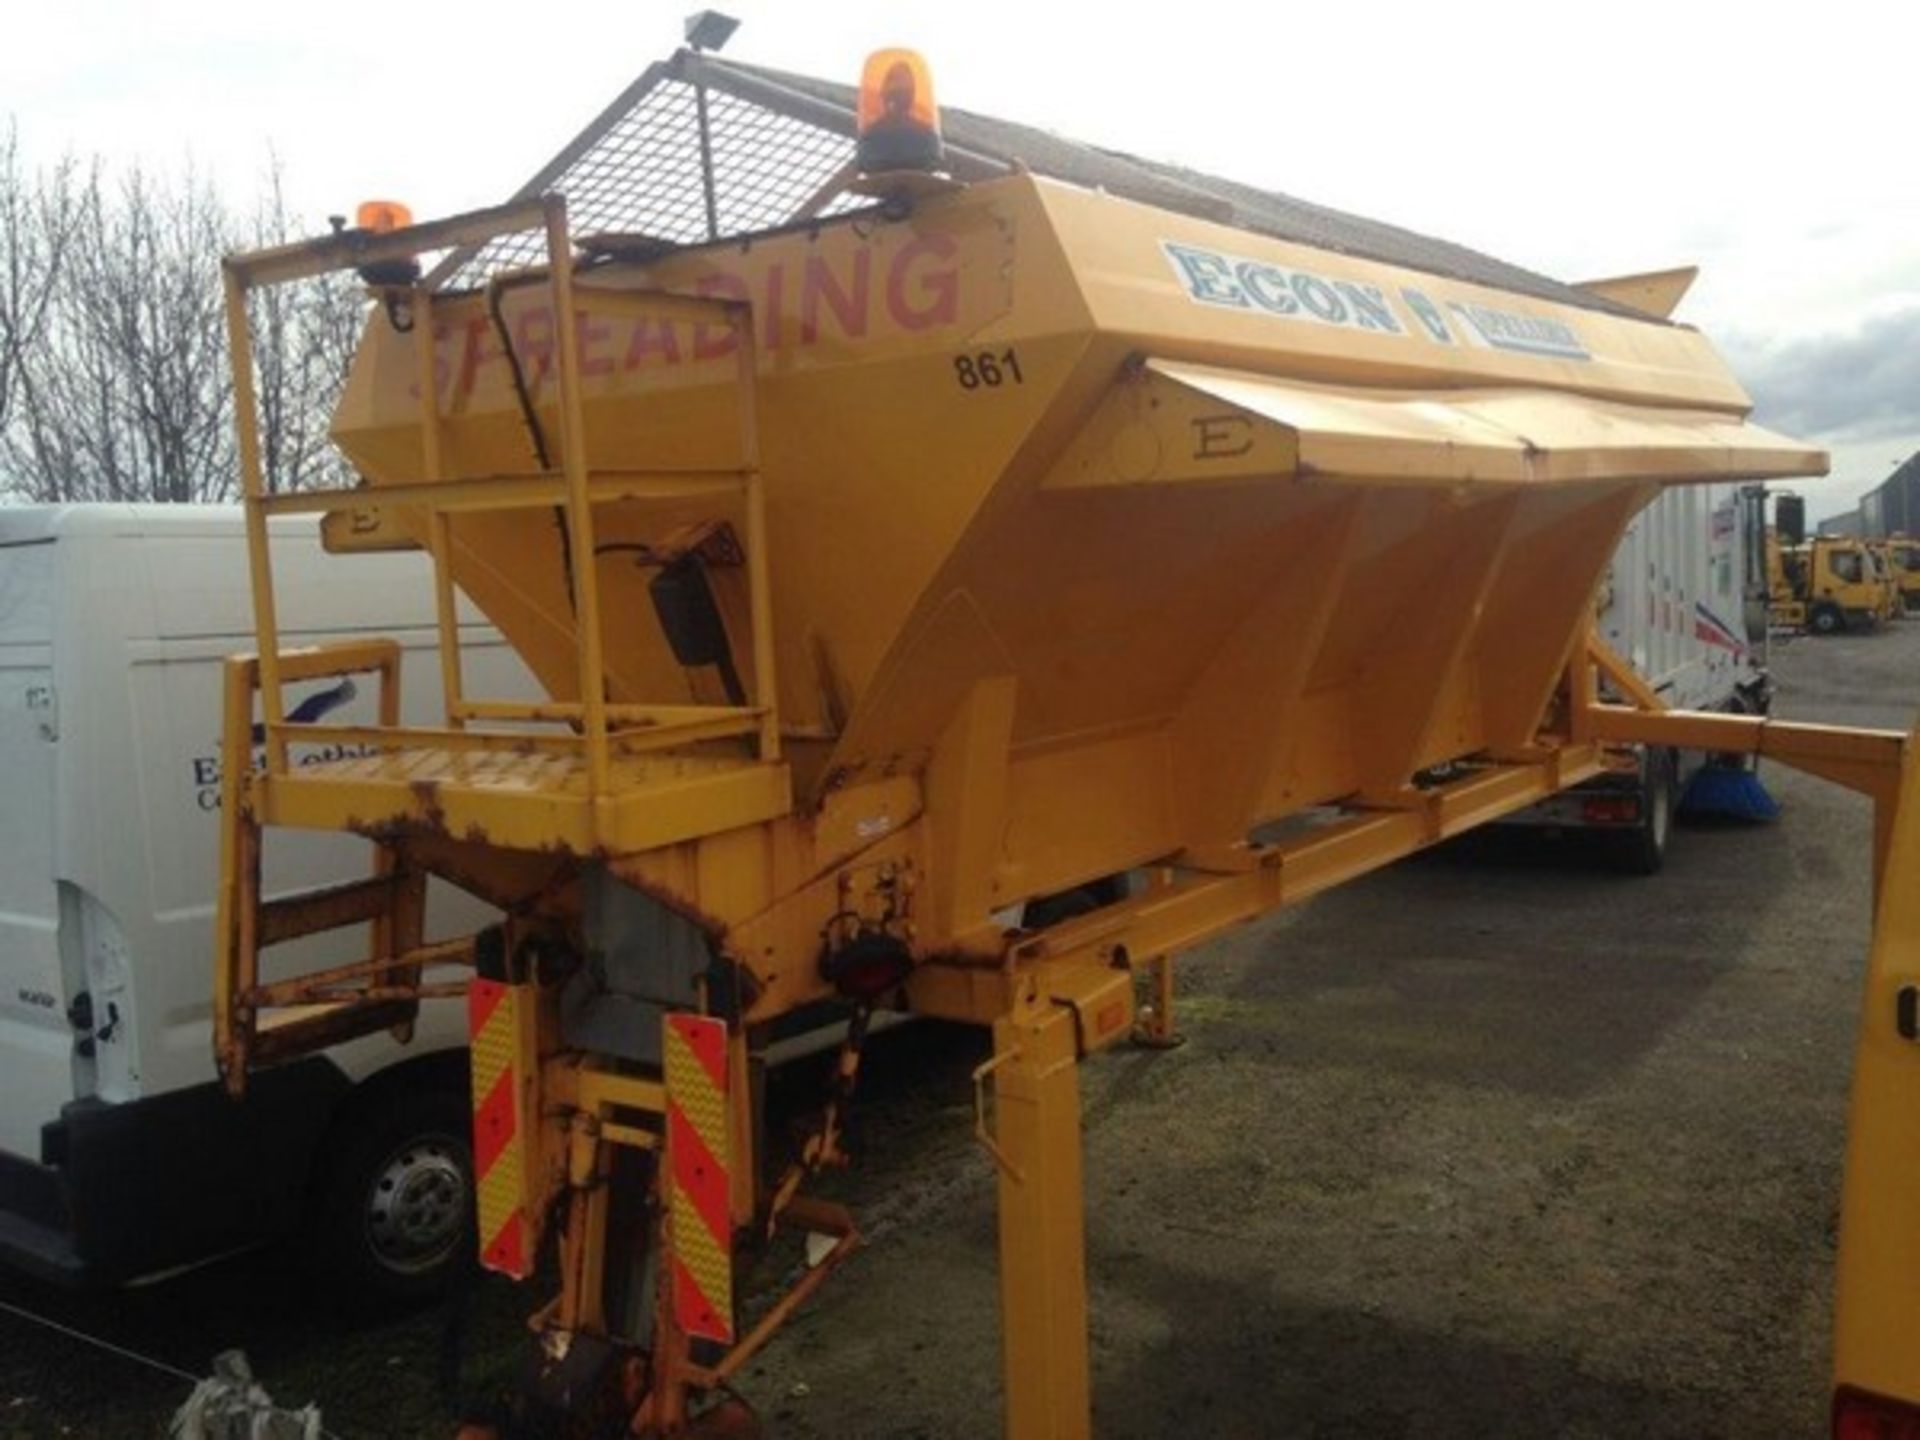 2004 ECON WZCQHJ46 body gritter s/n 37770 Reg No SN58 CVH (861) **To be sold from Errol auction s - Image 7 of 12